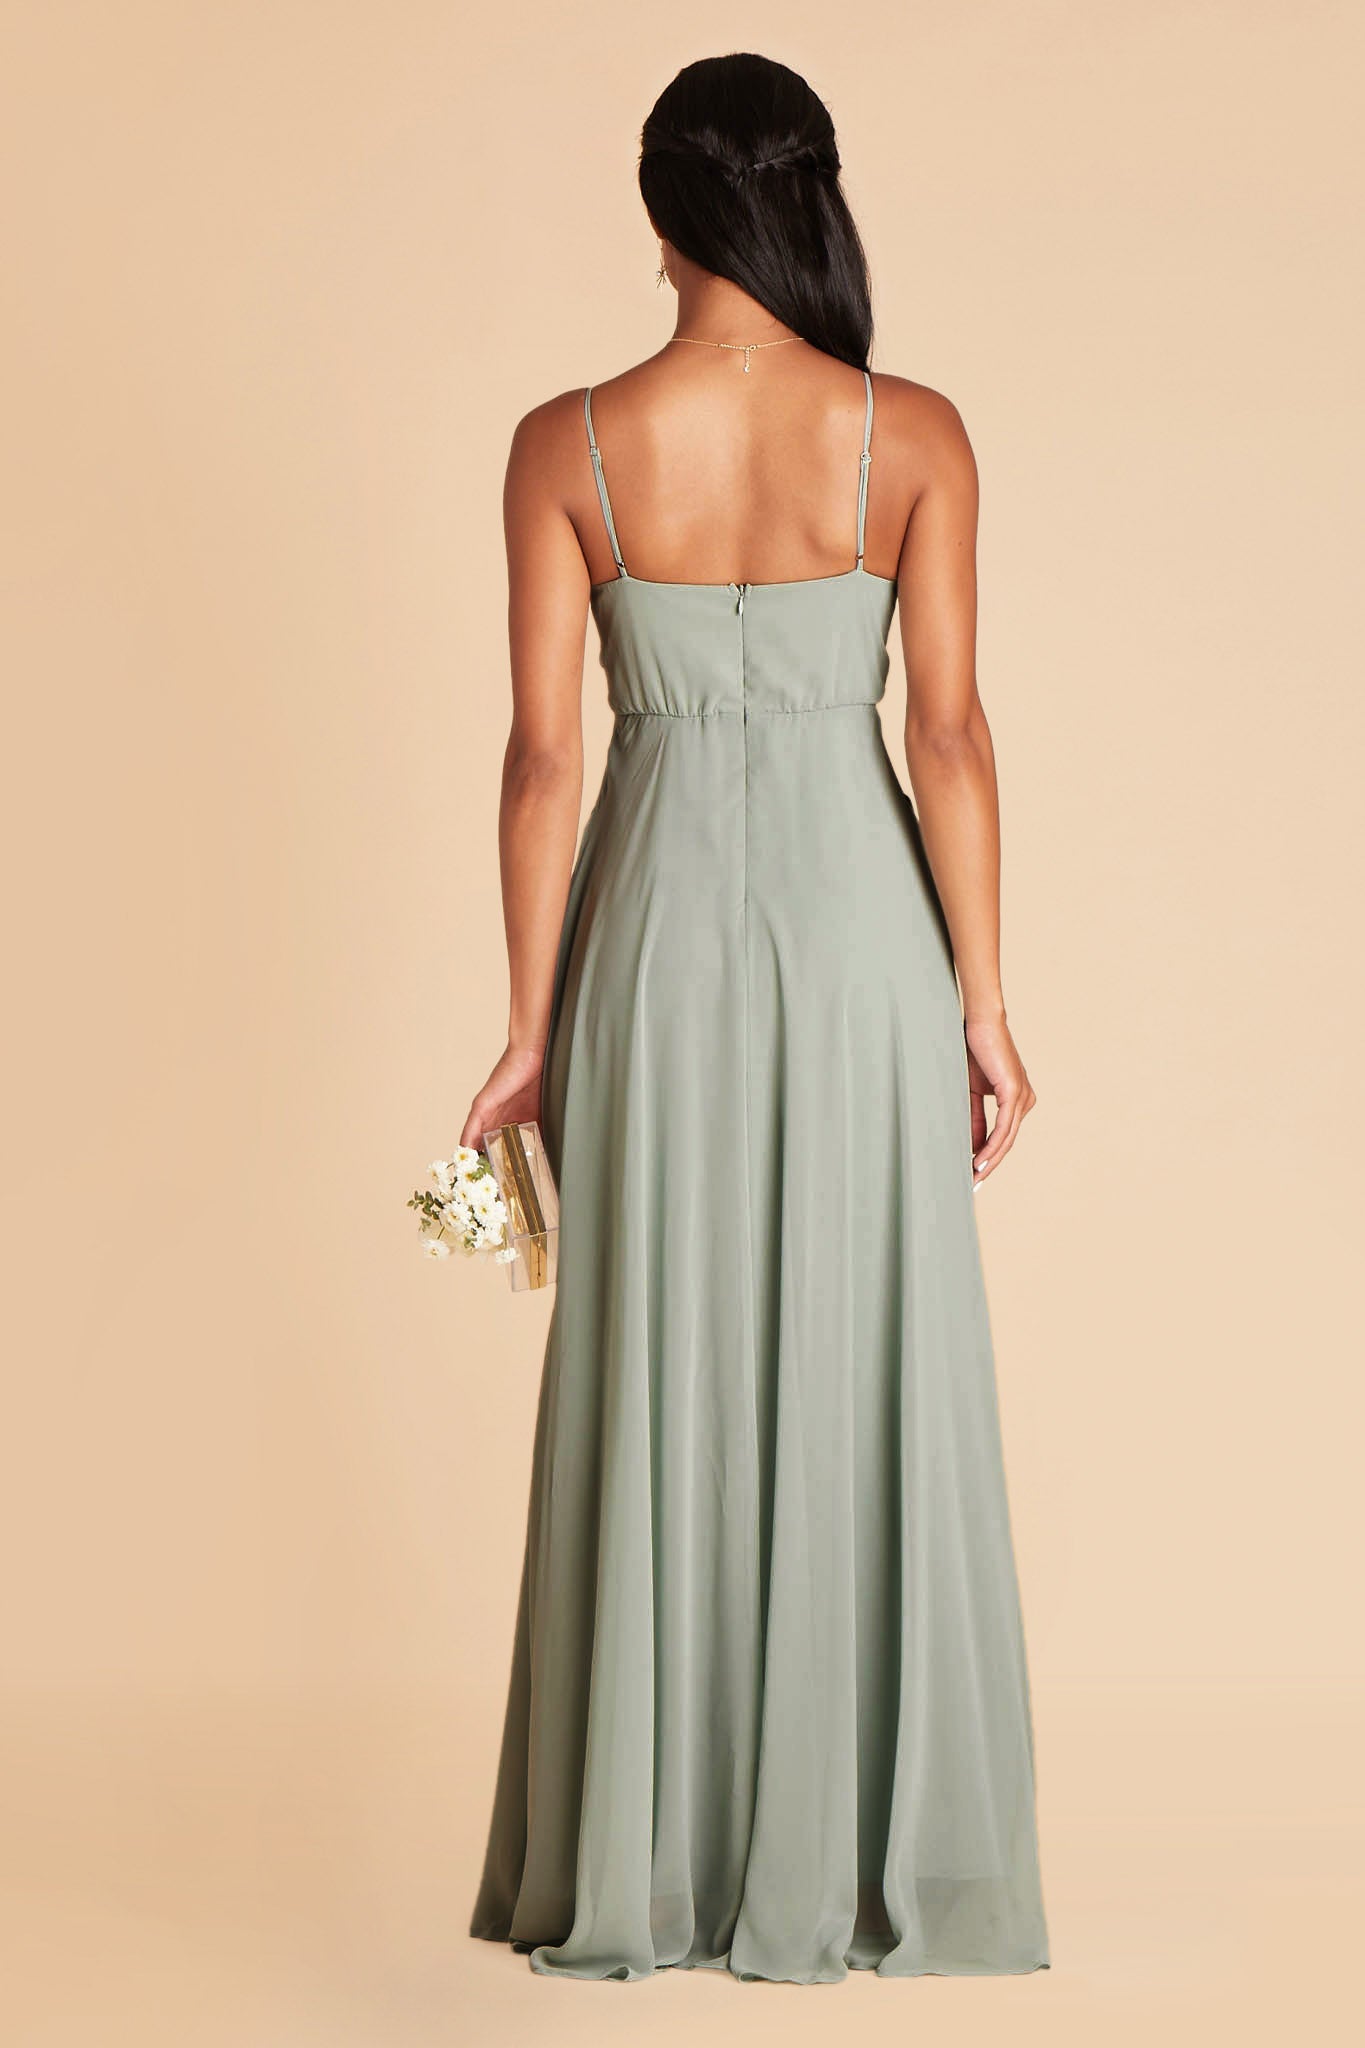 Back view of the Kaia Dress in sage chiffon shows the hook and eye closure and zipper in the center seam of the dress bodice and skirt.